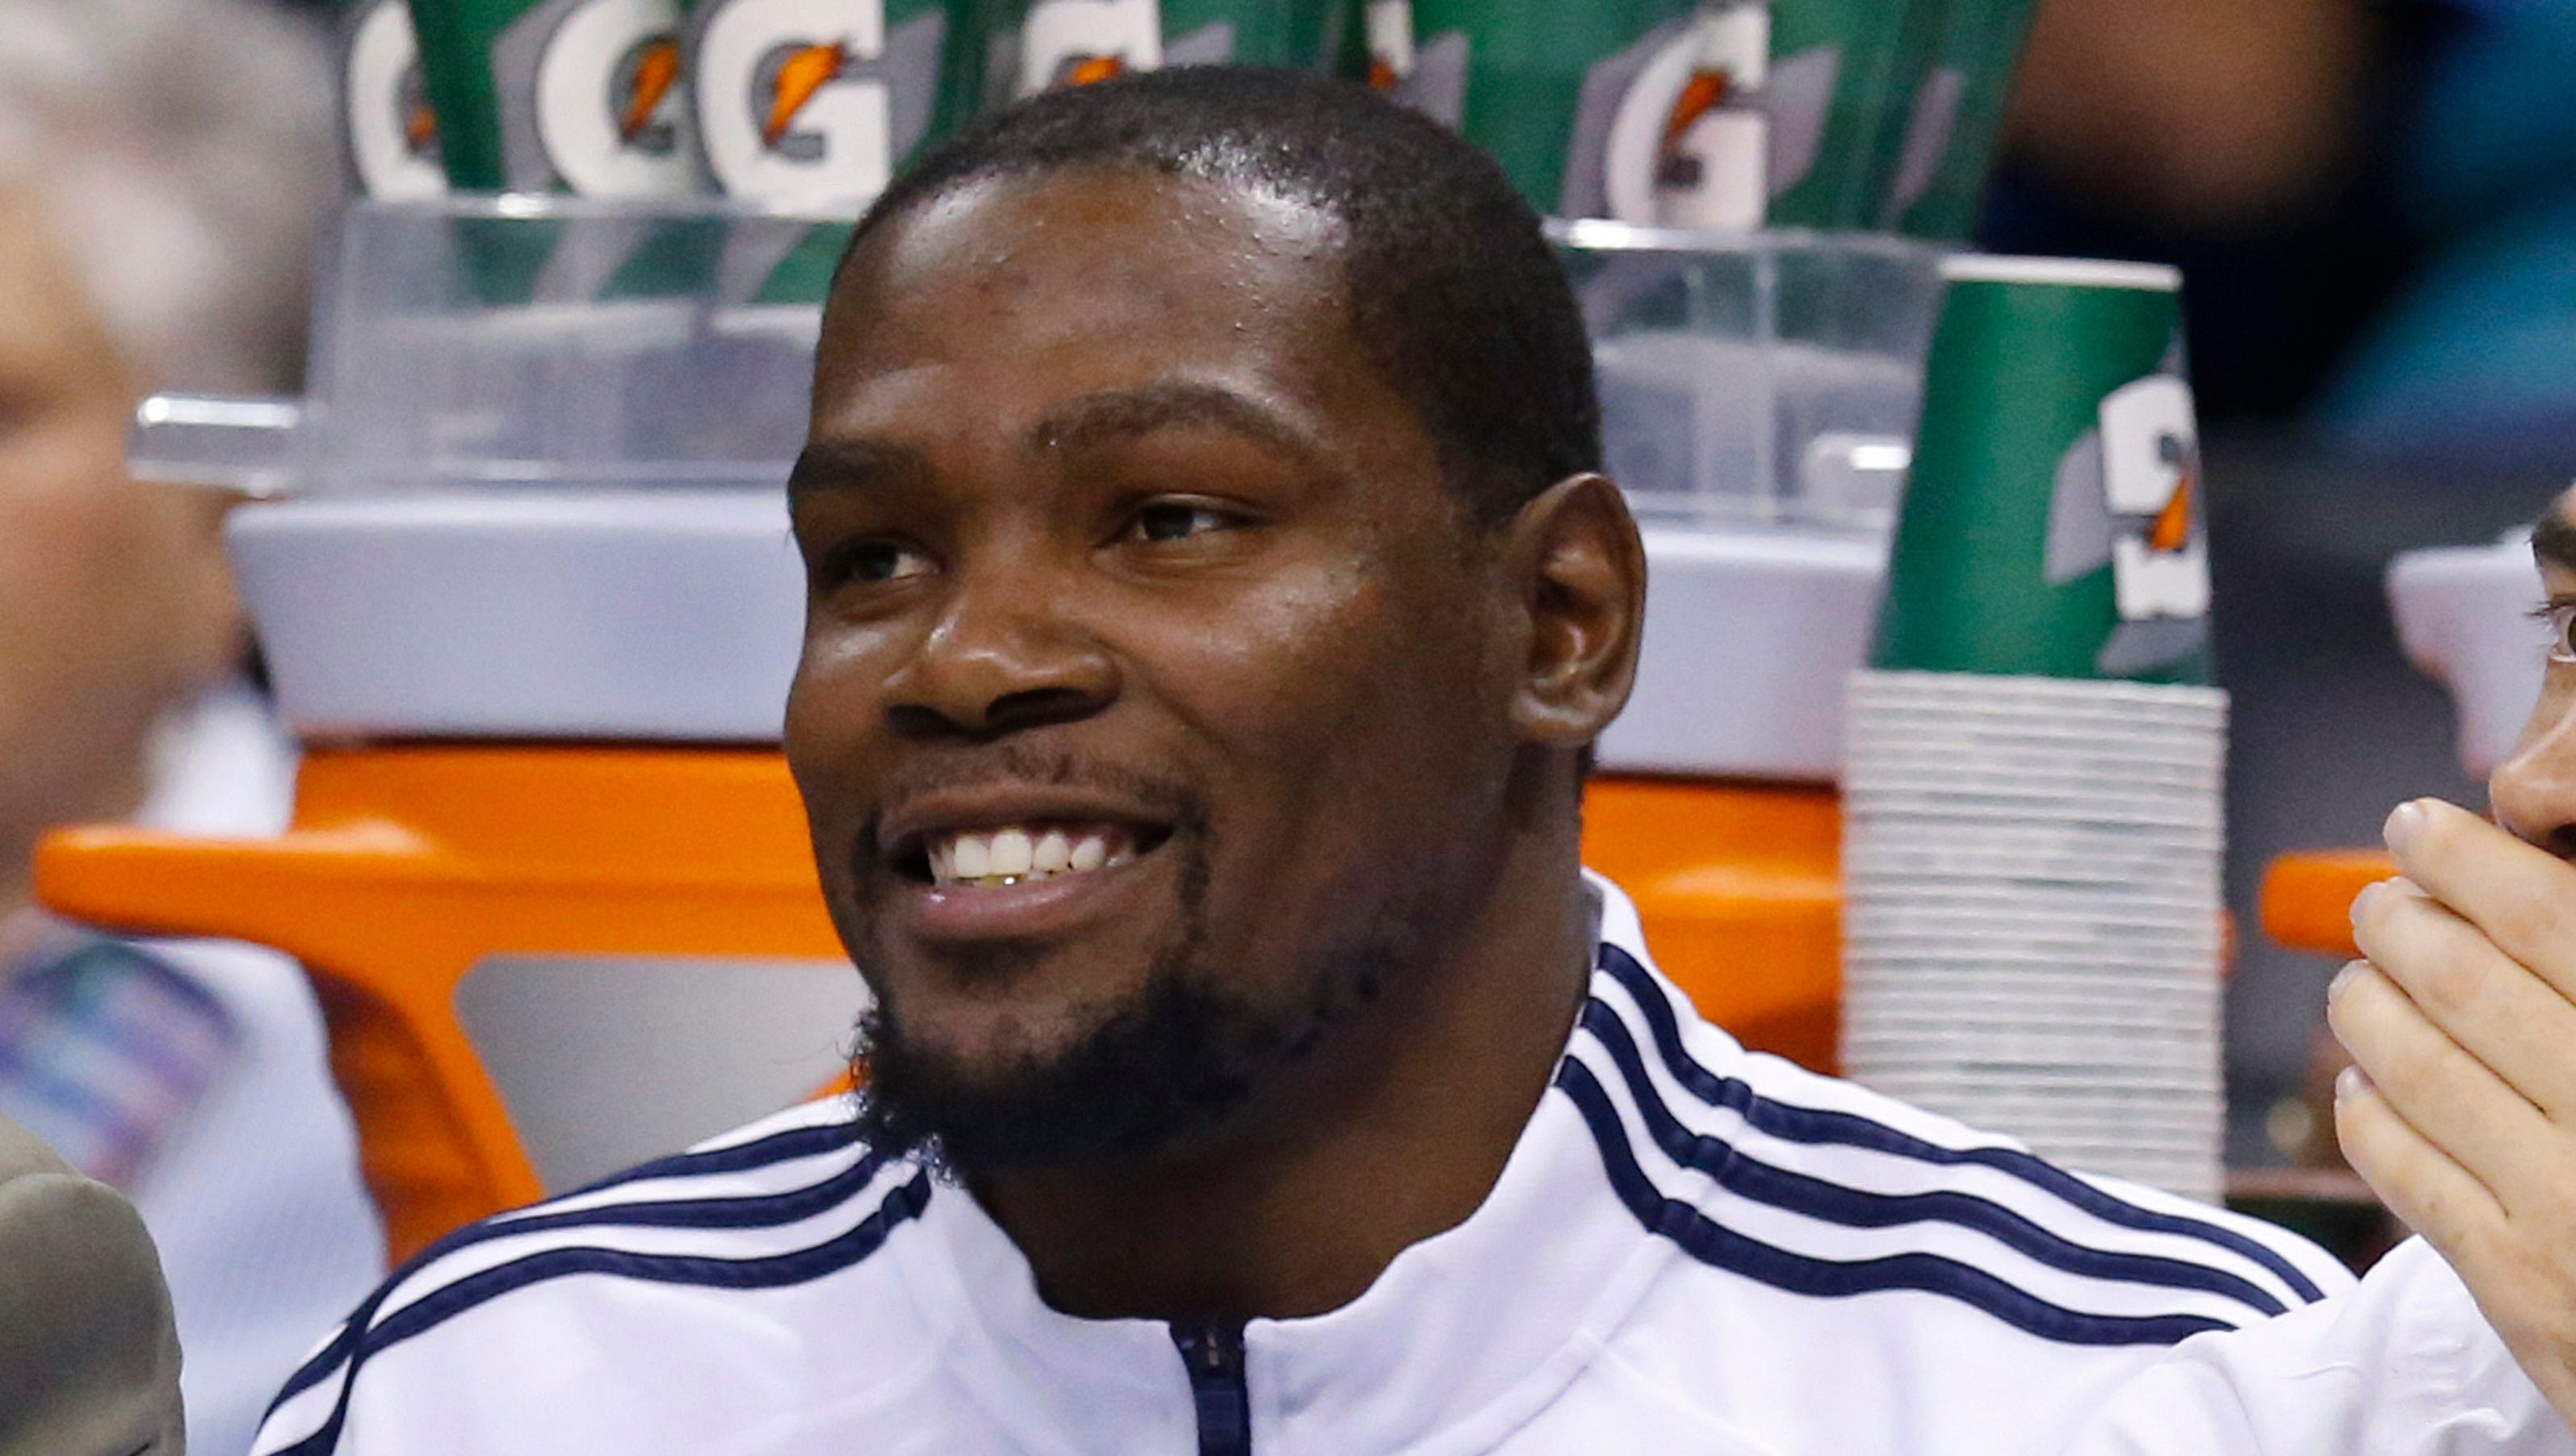 Kevin Durant has surgery for foot fracture